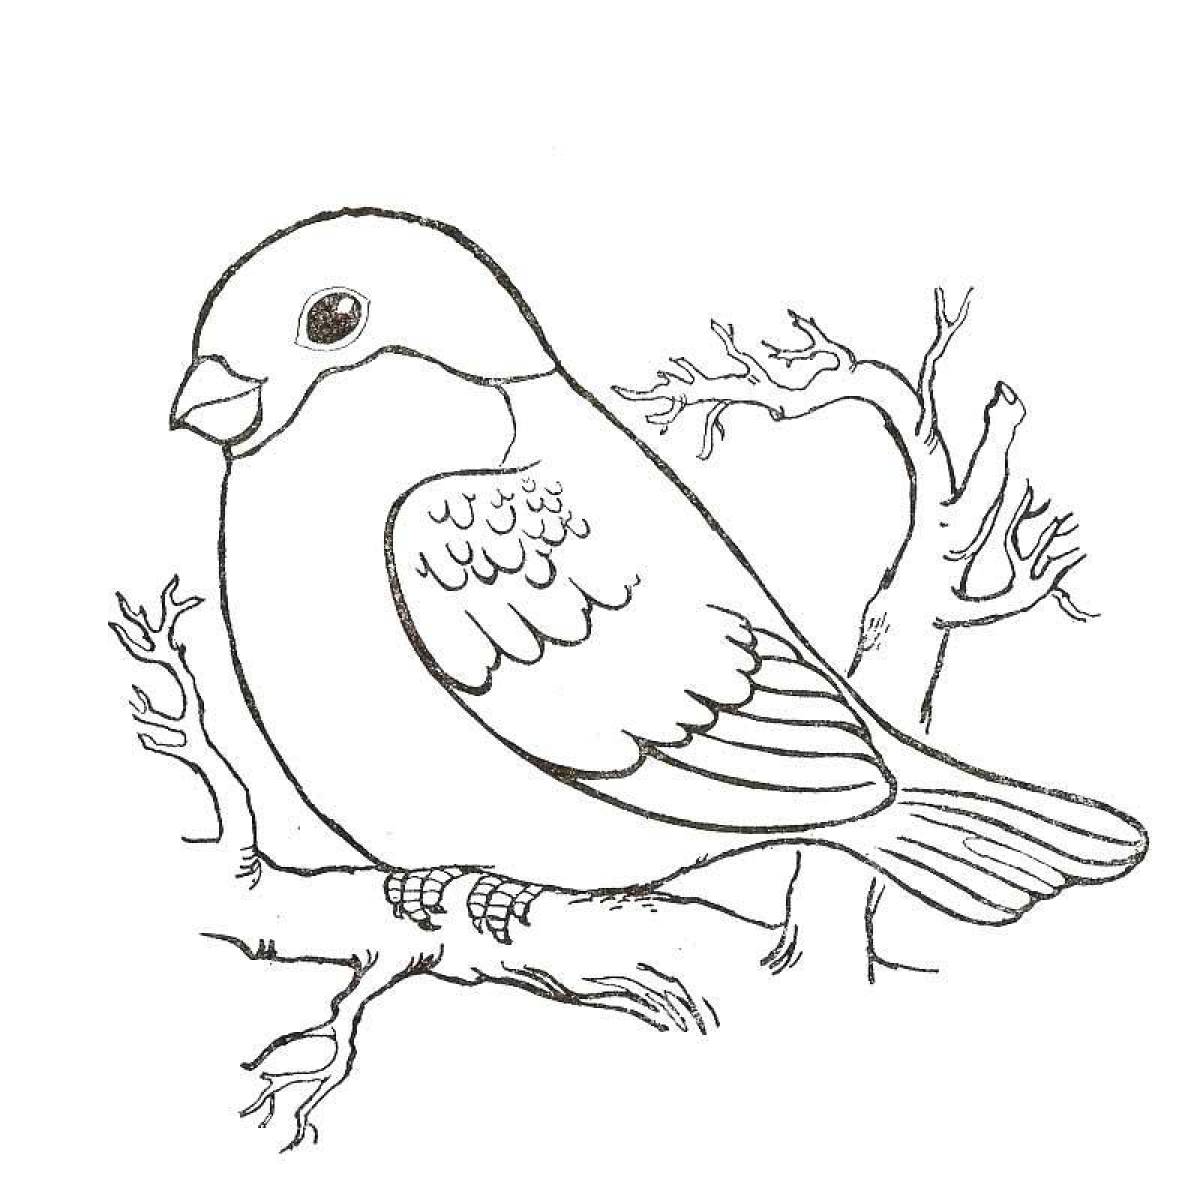 Fantastic bird coloring page for 6-7 year olds